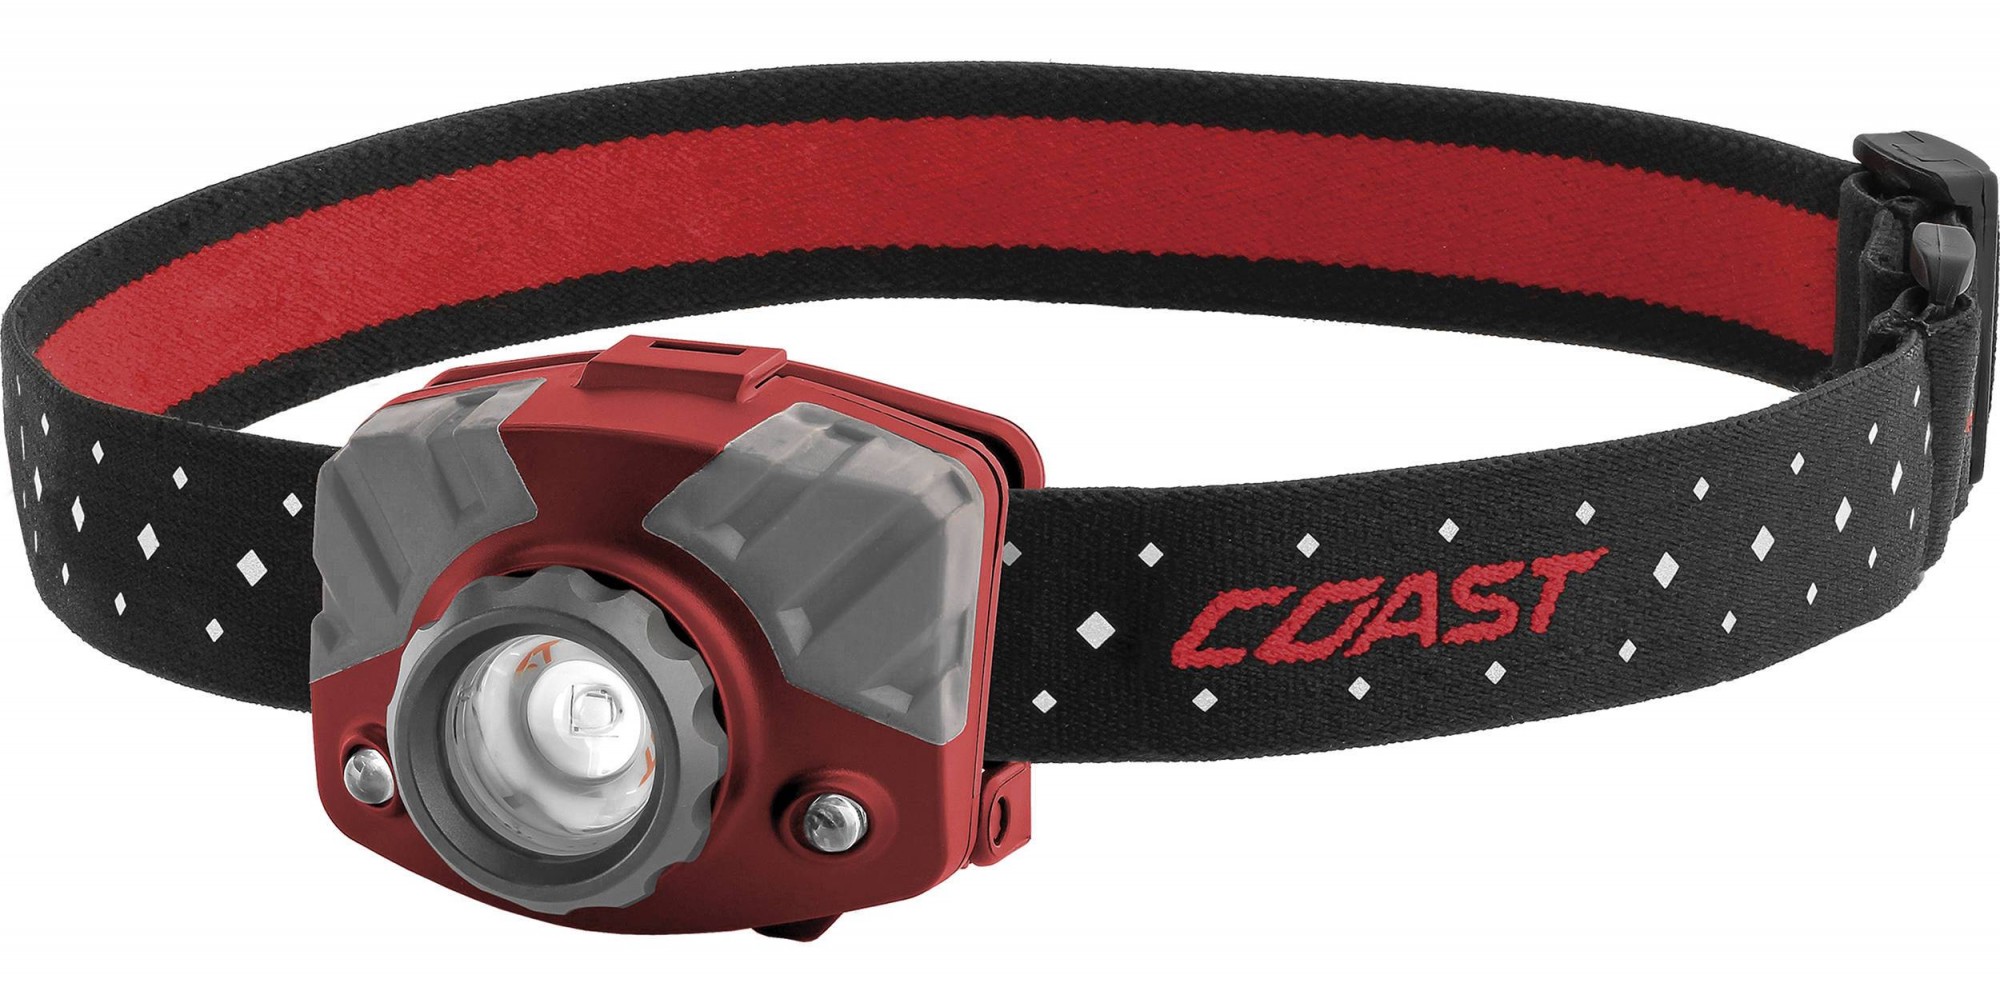 Coast FL75R Rechargeable Pure Beam Focus Headlamp - 20618, Red